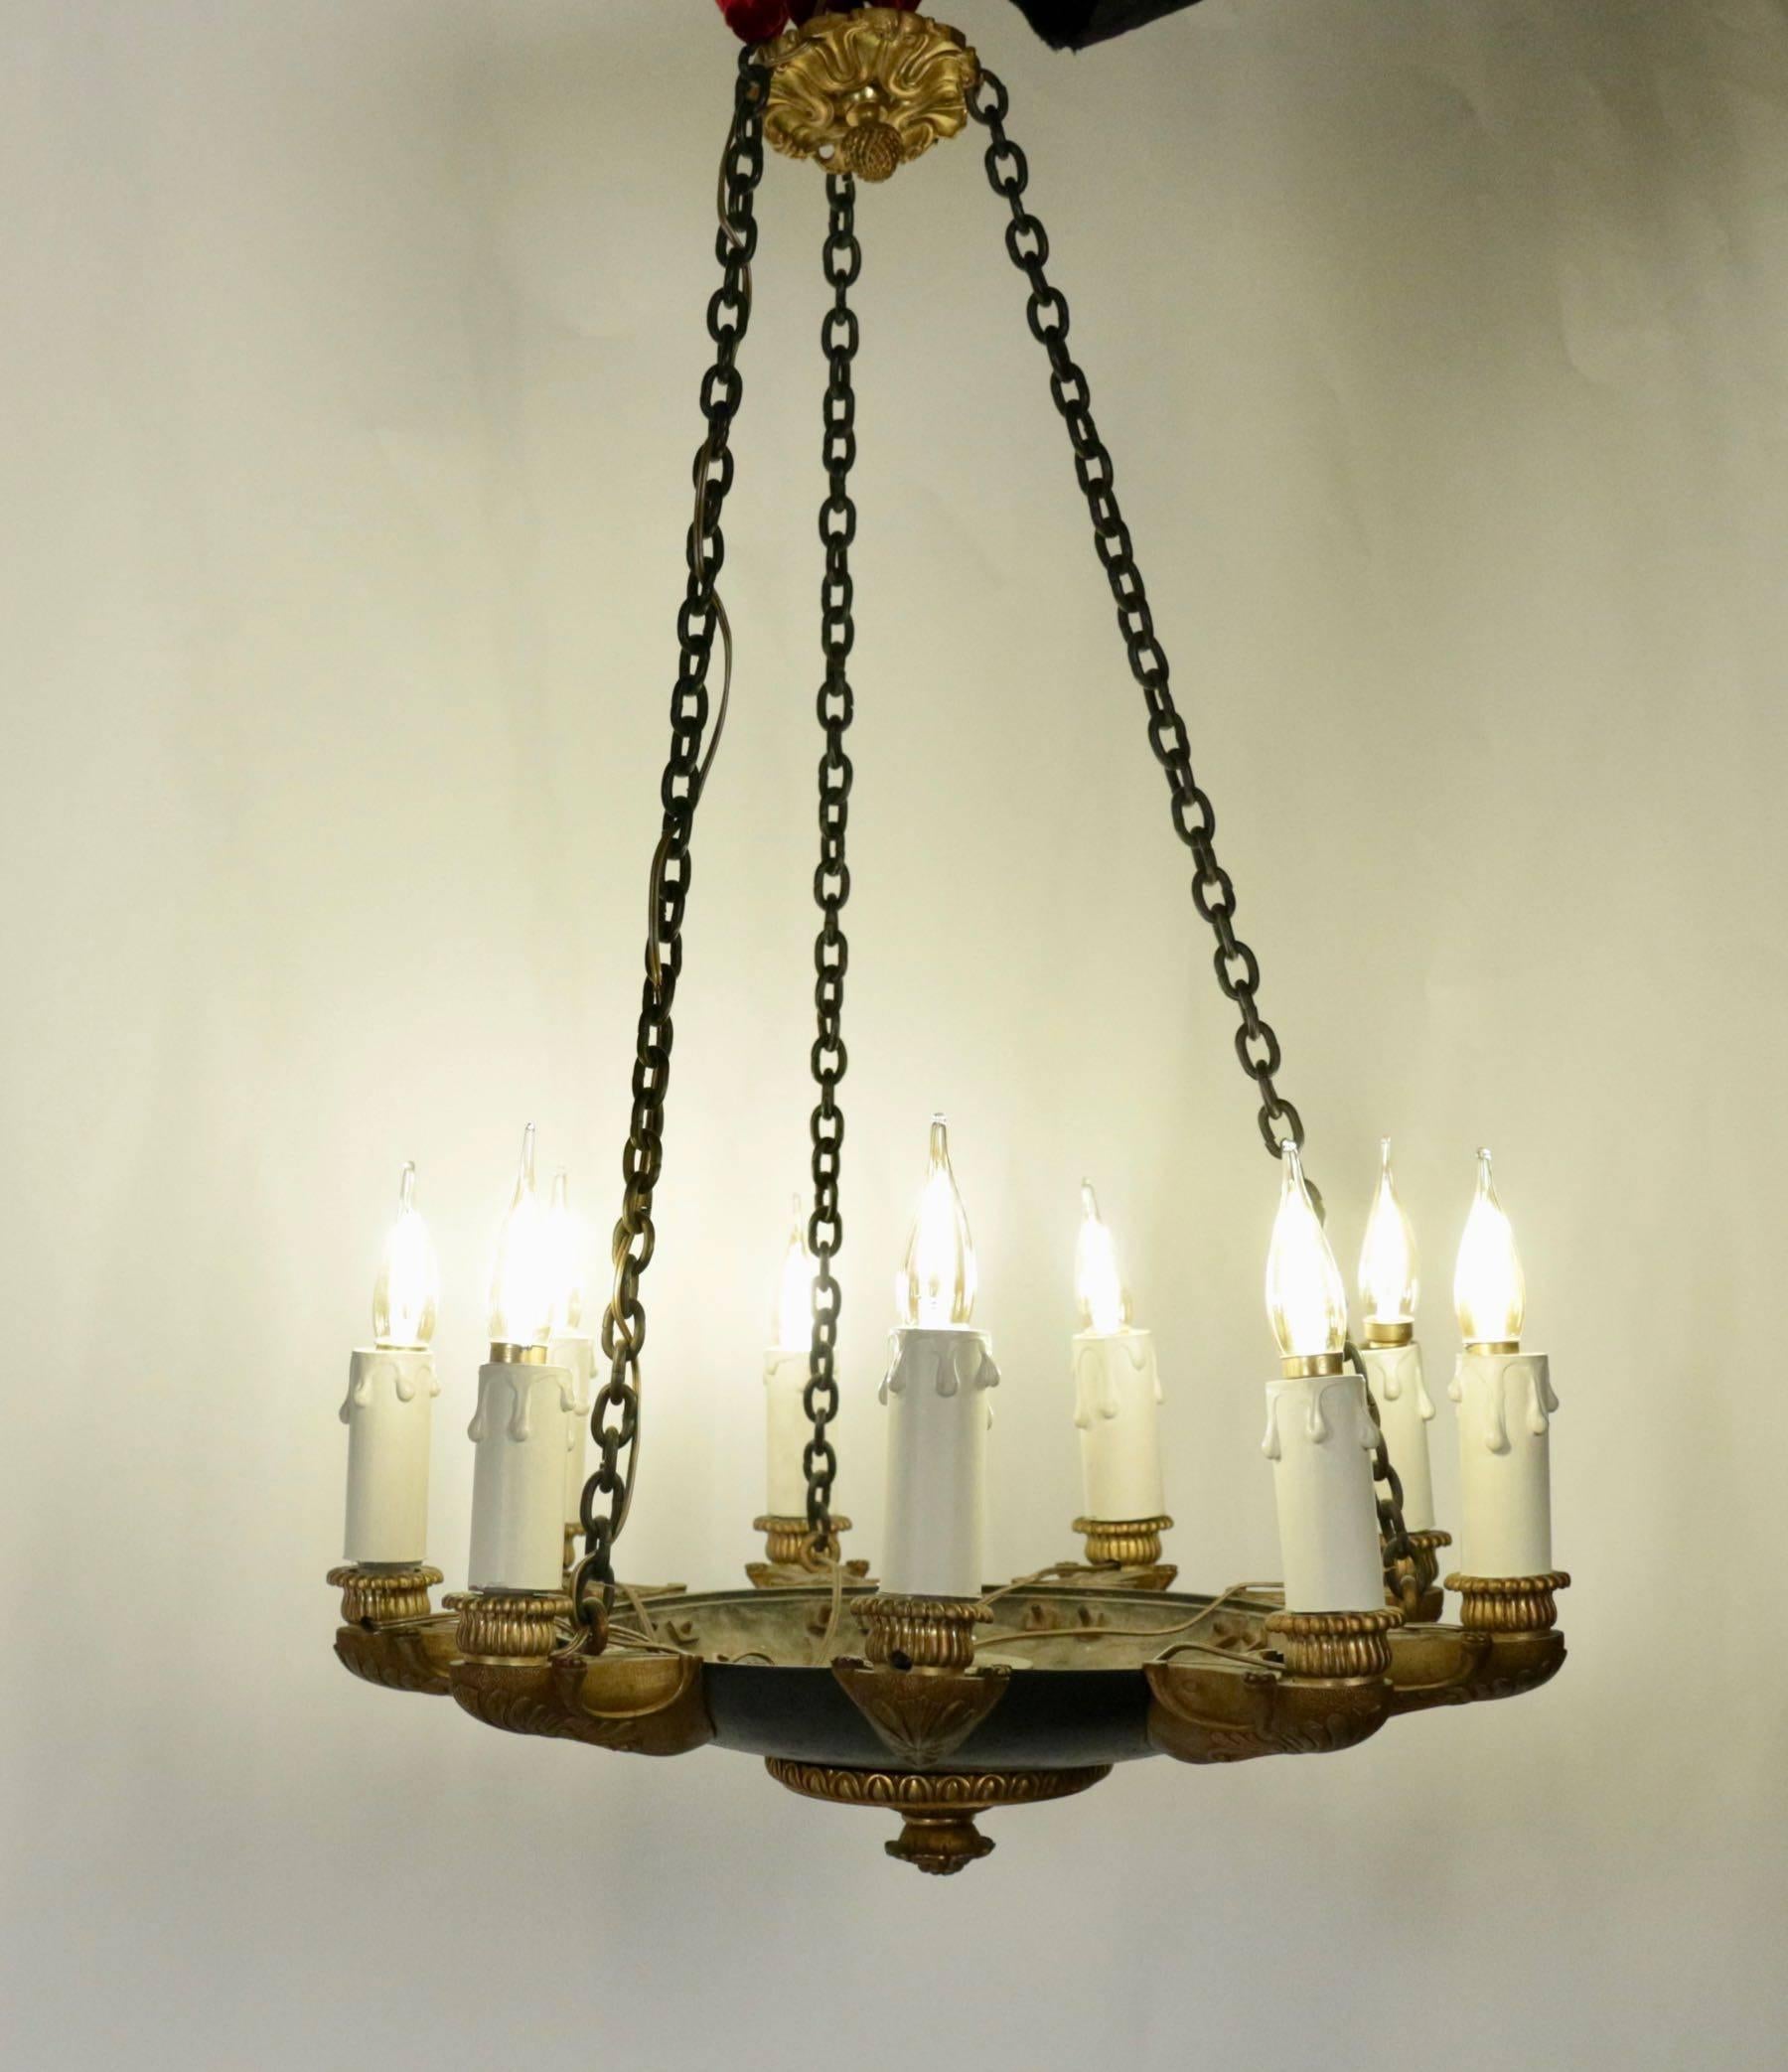 French Small Unusual Empire Chandelier with Many Arms '9 Lights'